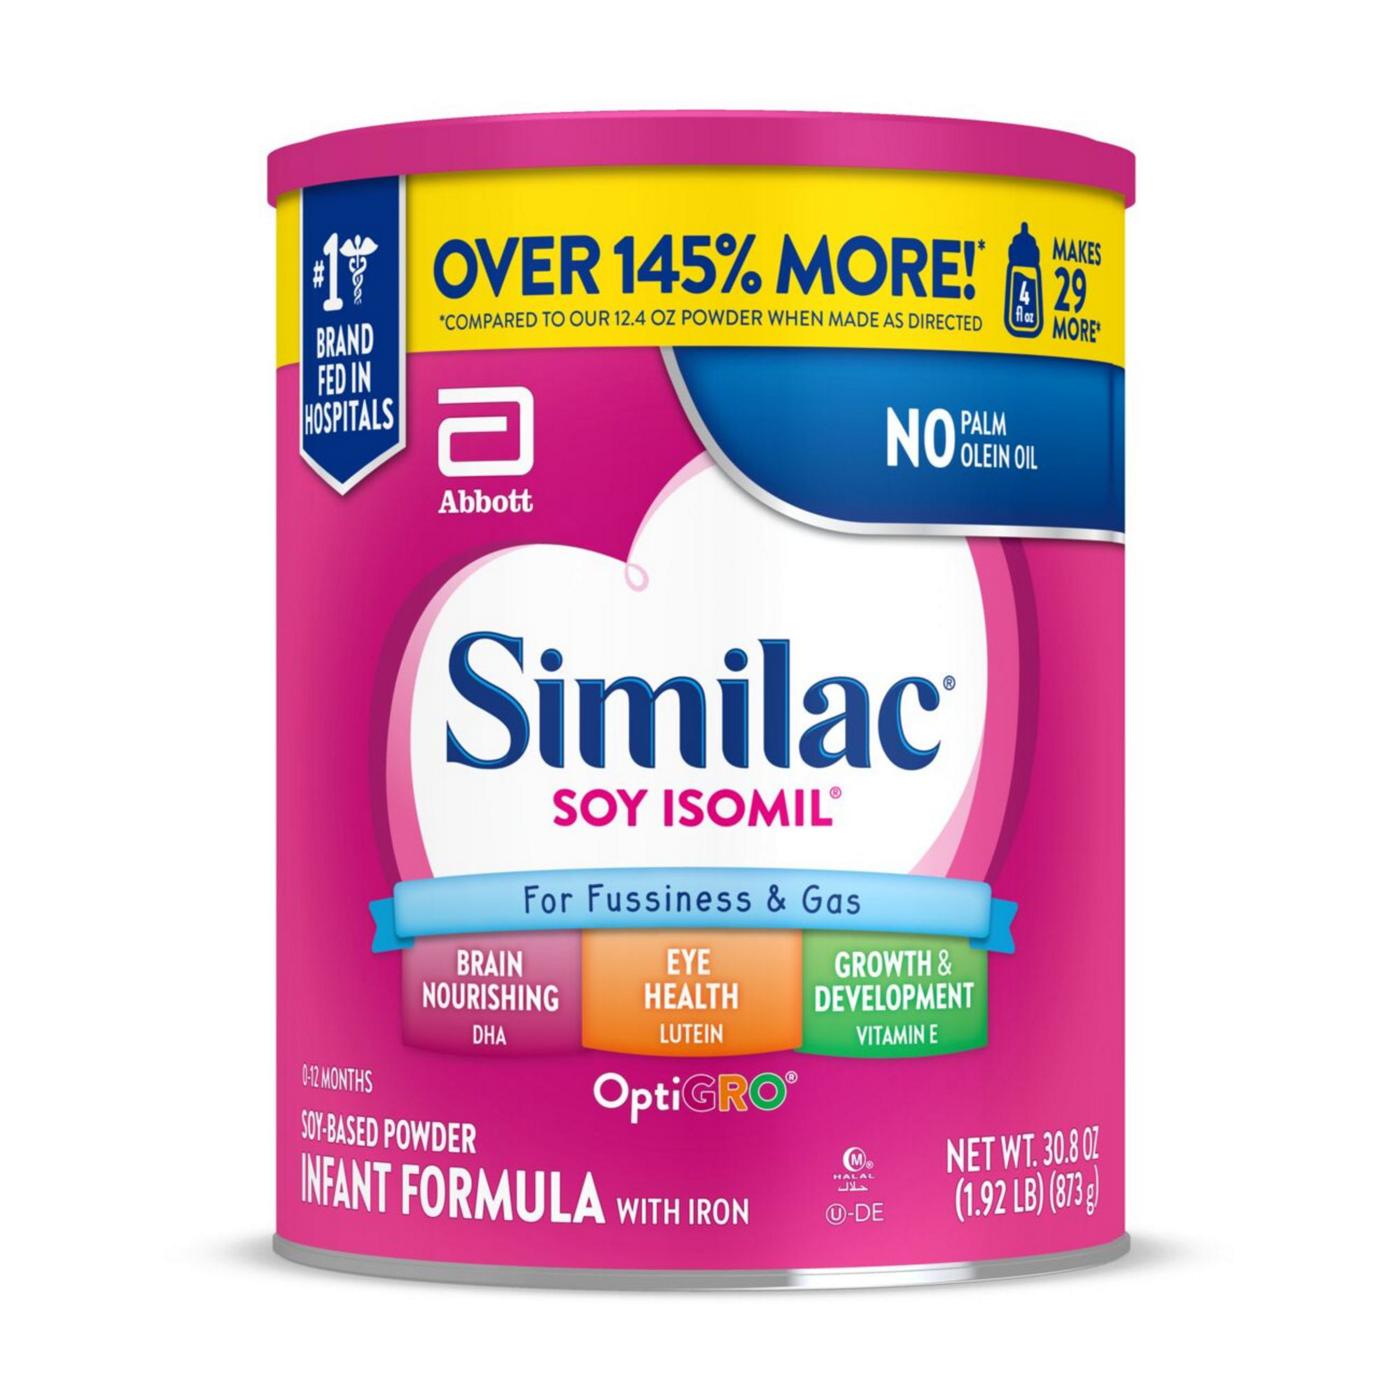 Similac Soy Isomil For Fussiness and Gas Infant Formula with Iron Powder; image 1 of 9